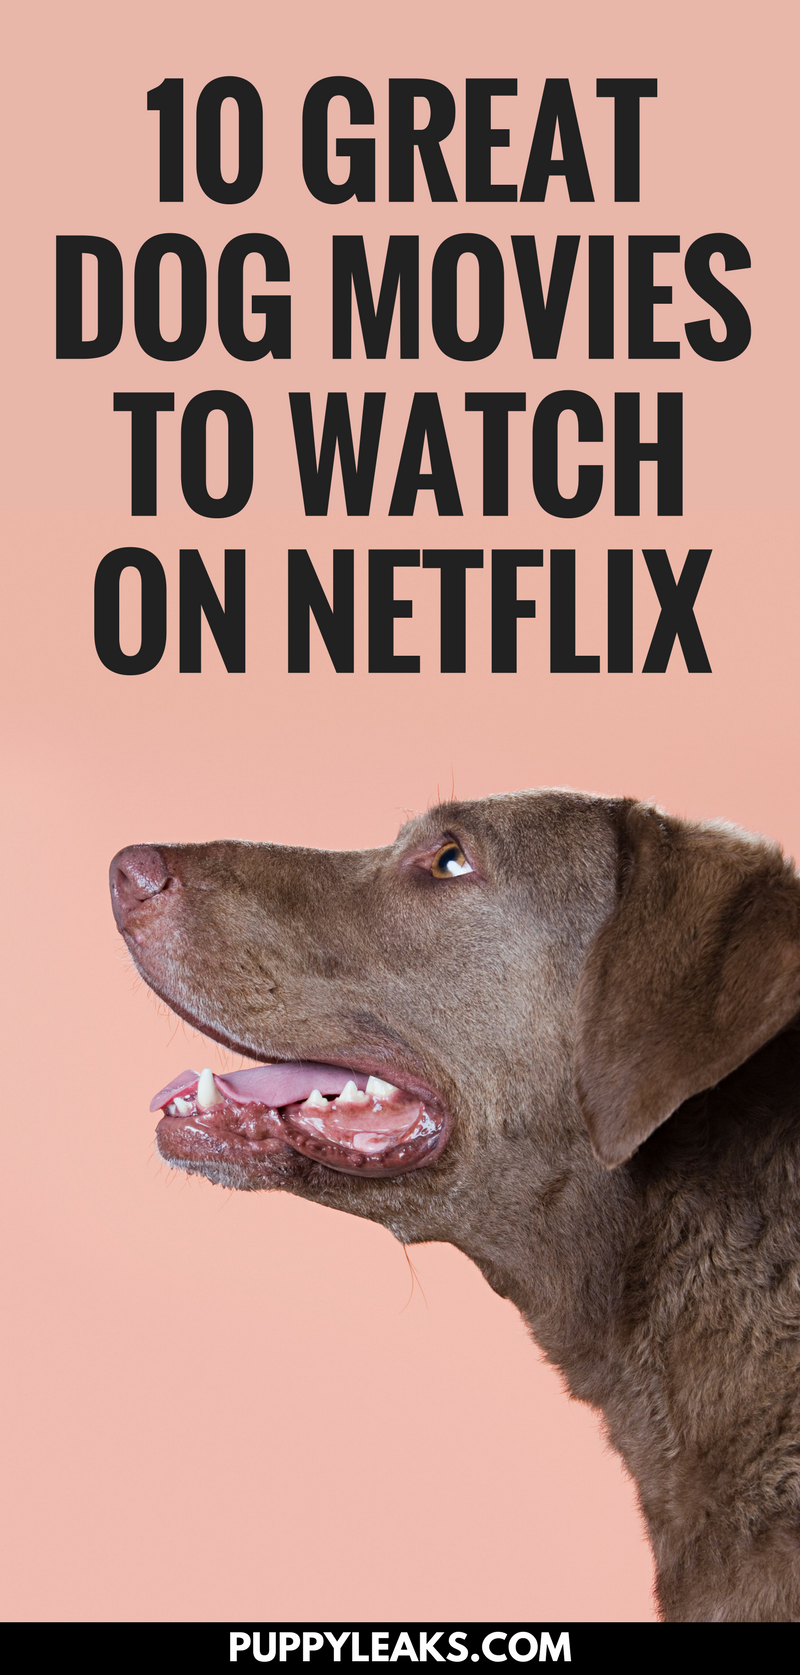 10 Great Dog Movies Available on Netflix - Puppy Leaks